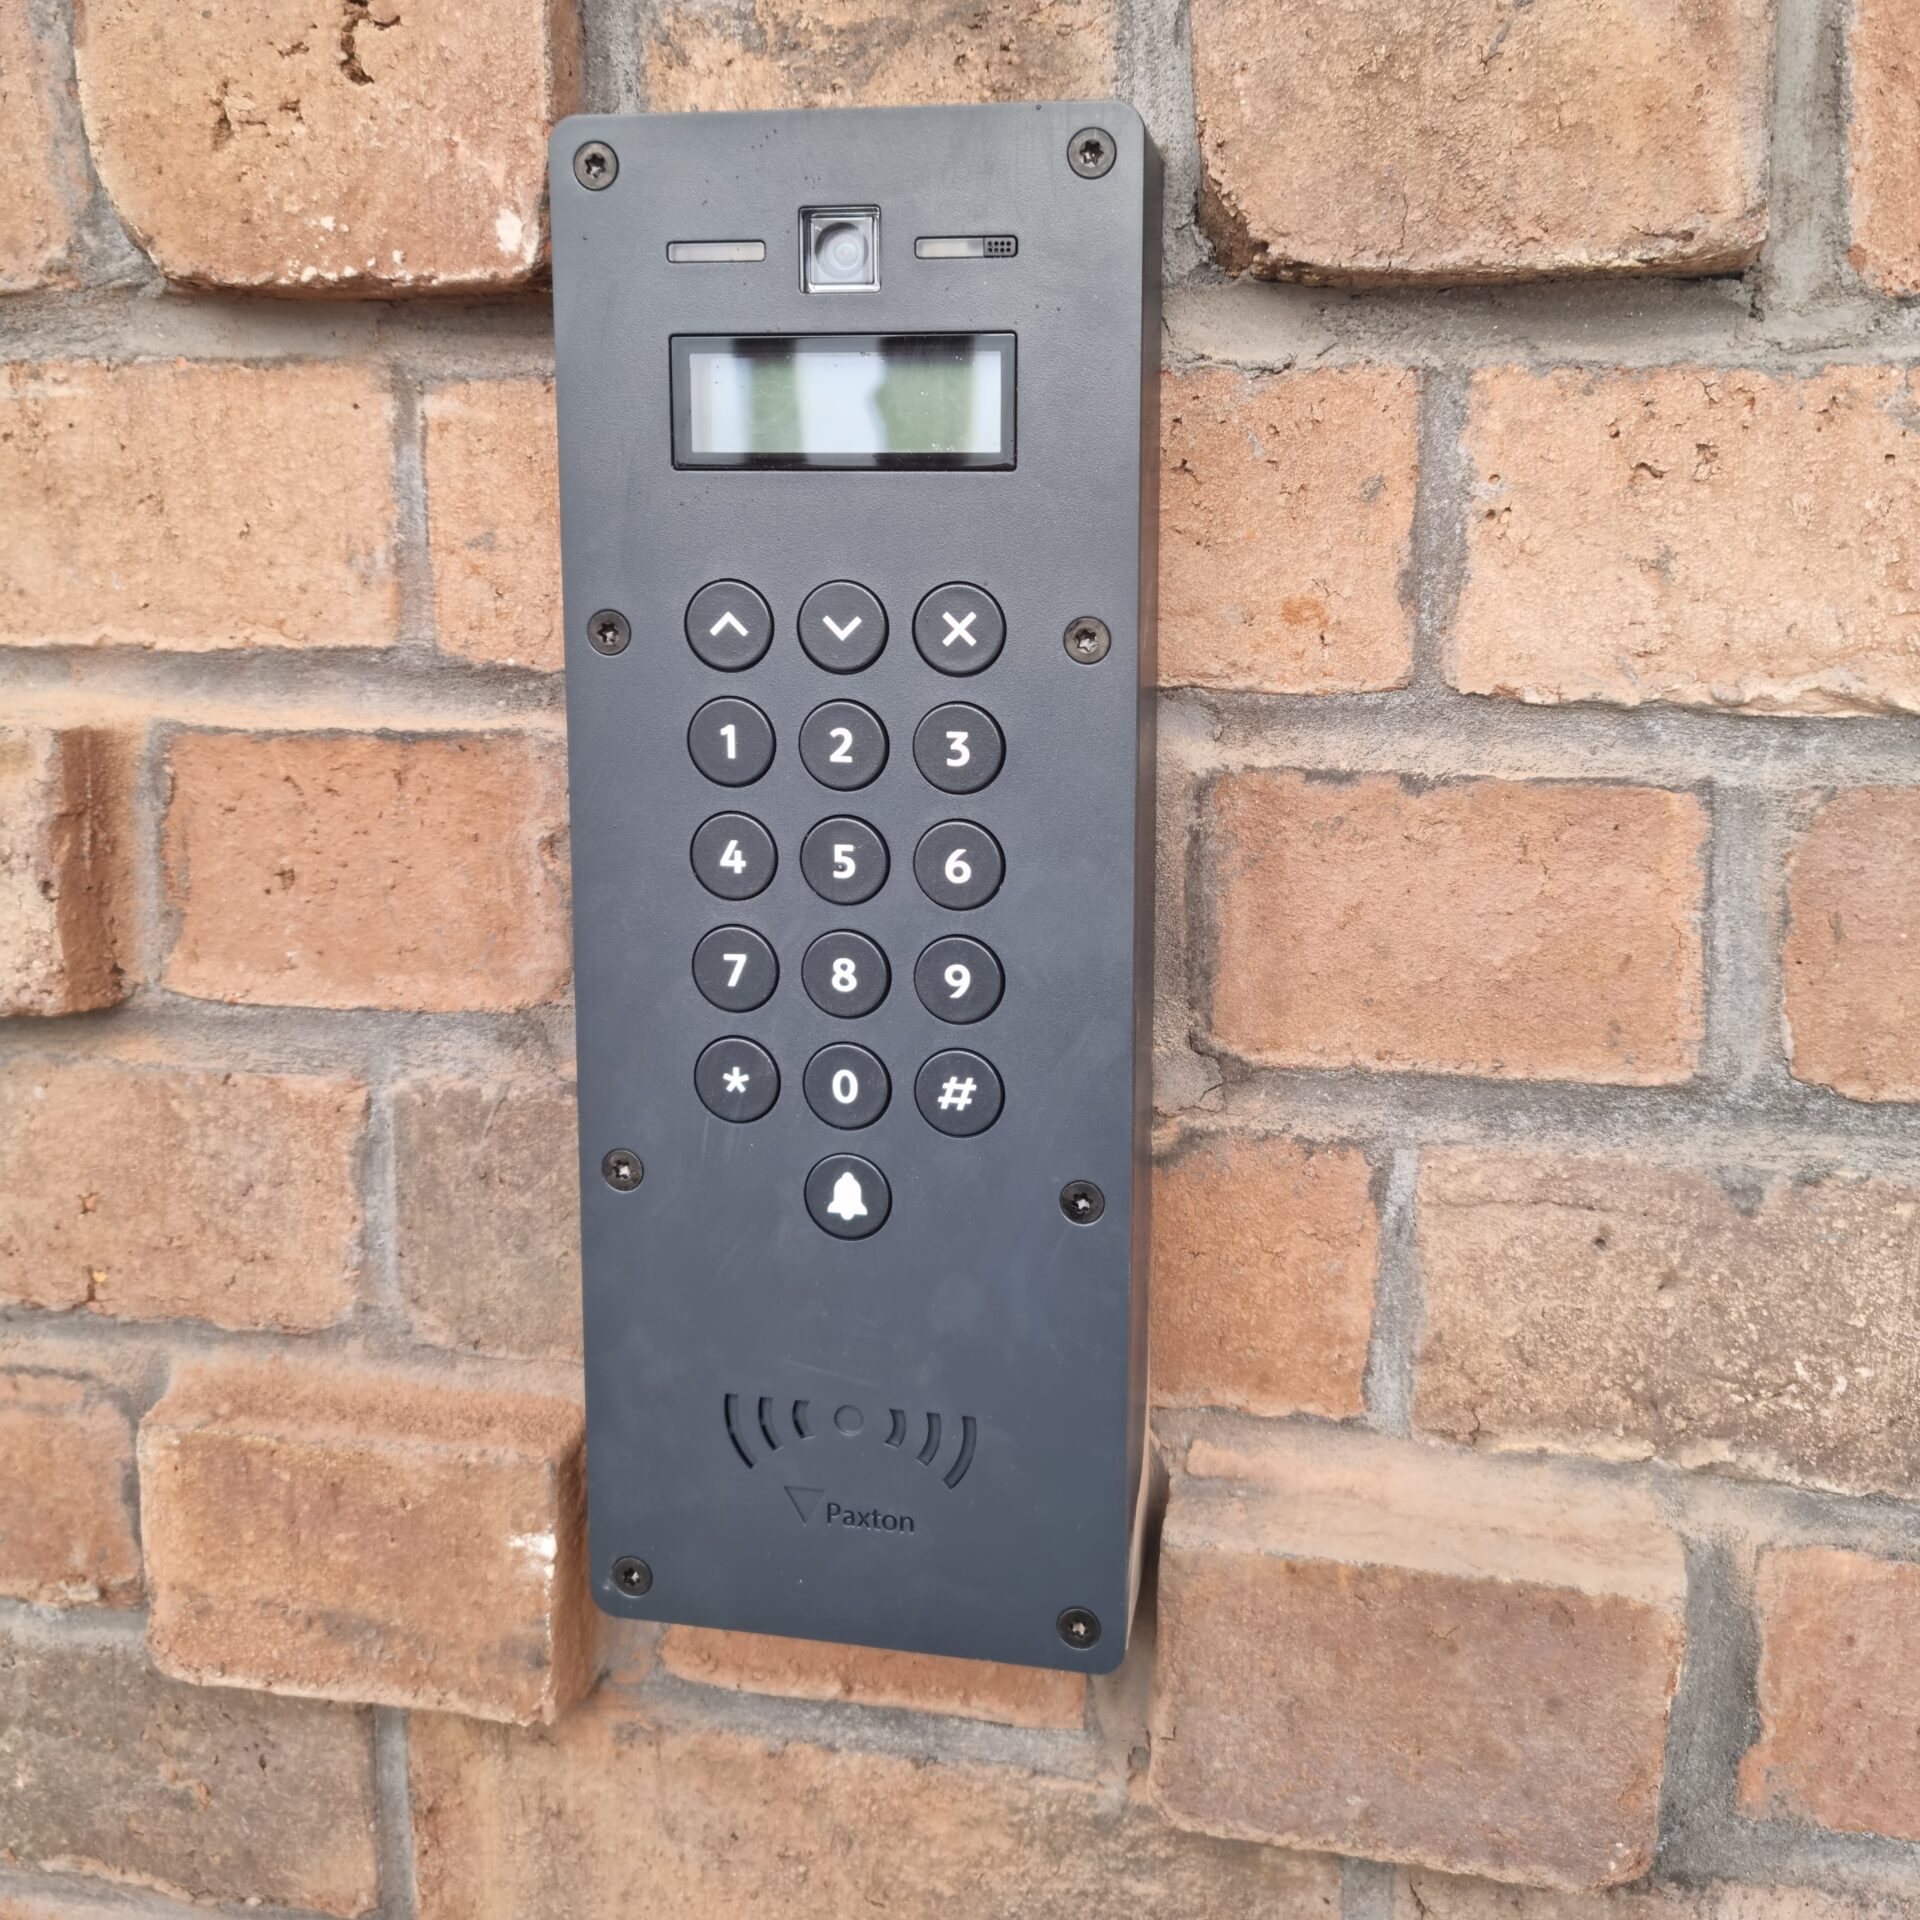 Image of a paxtin intercom system mounted on a brick wall